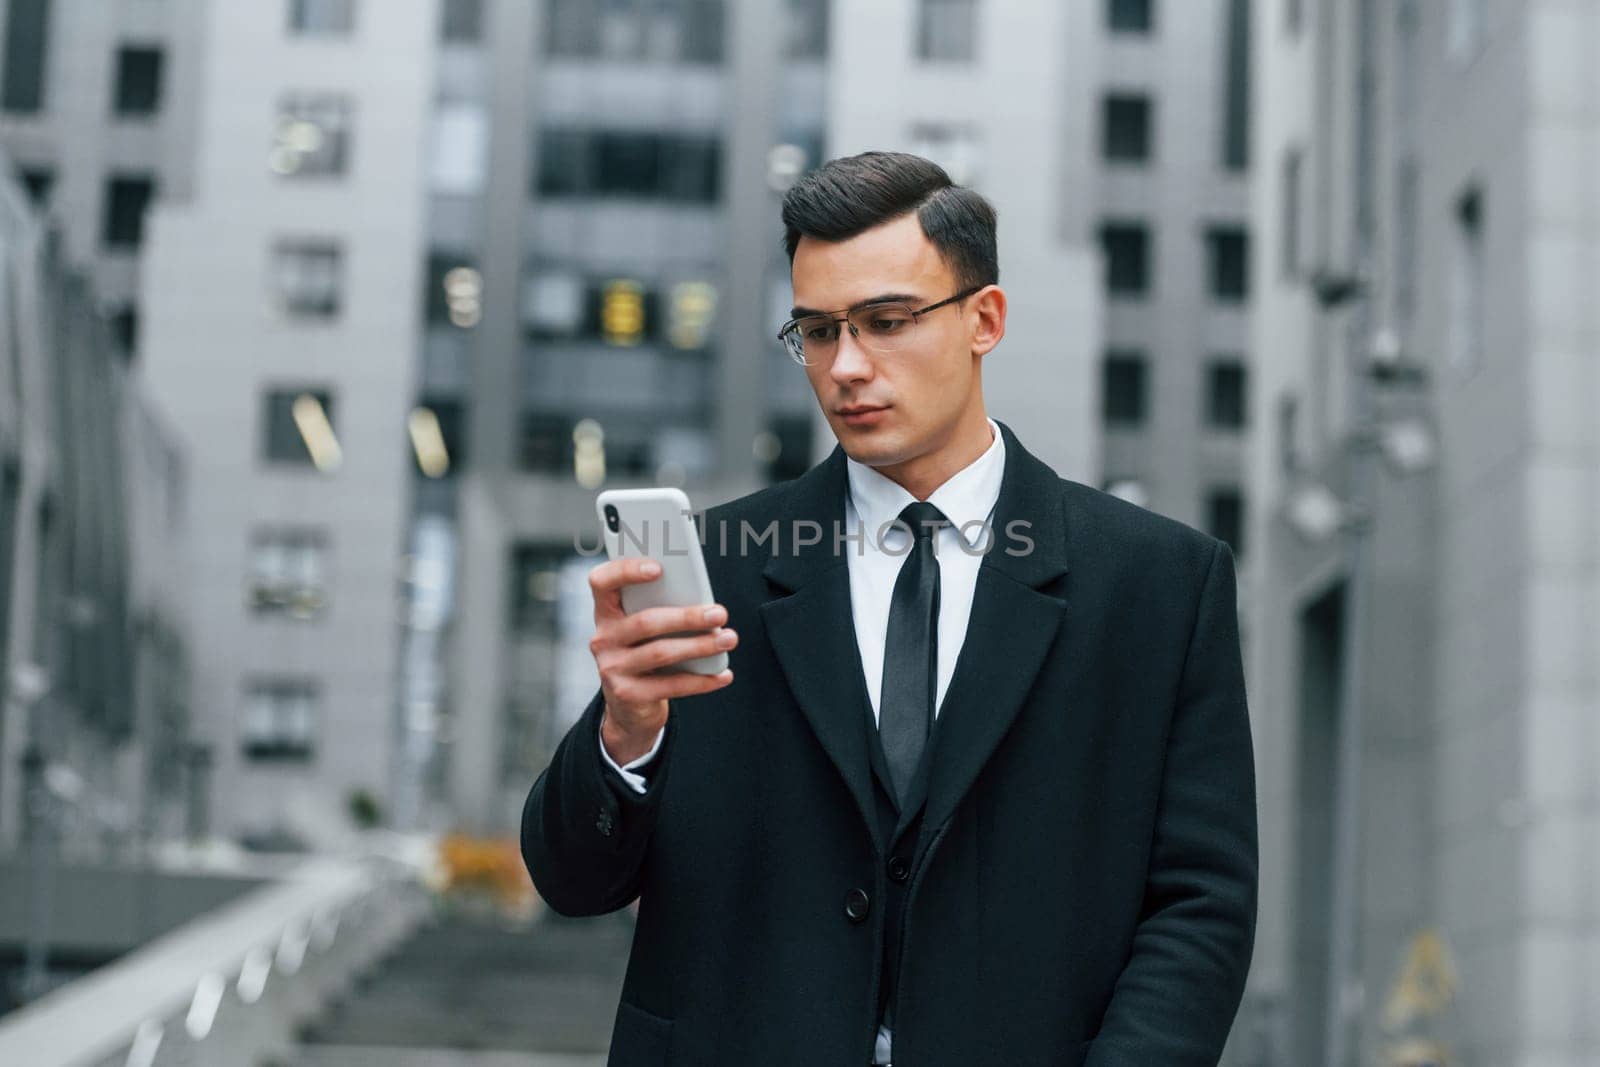 With smartphone. Businessman in black suit and tie is outdoors in the city.